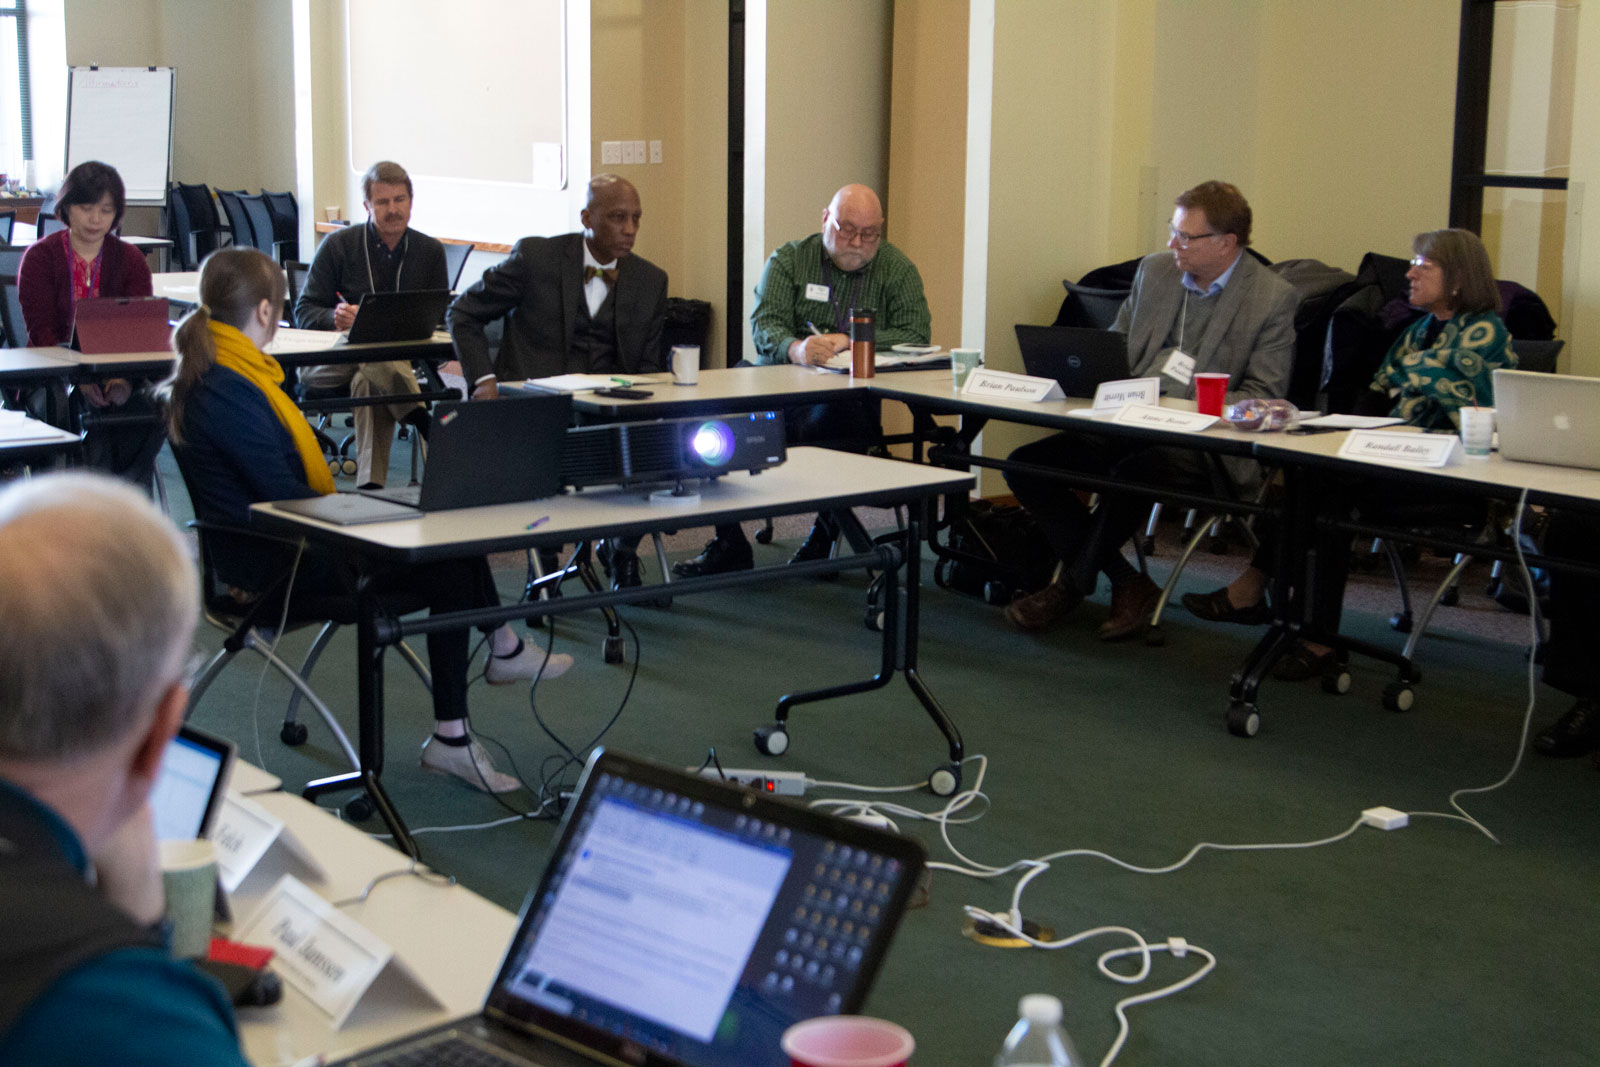 The GACEIR has been holding its winter meeting at the PC(USA) offices in Louisville. Photo by Randy Hobson.